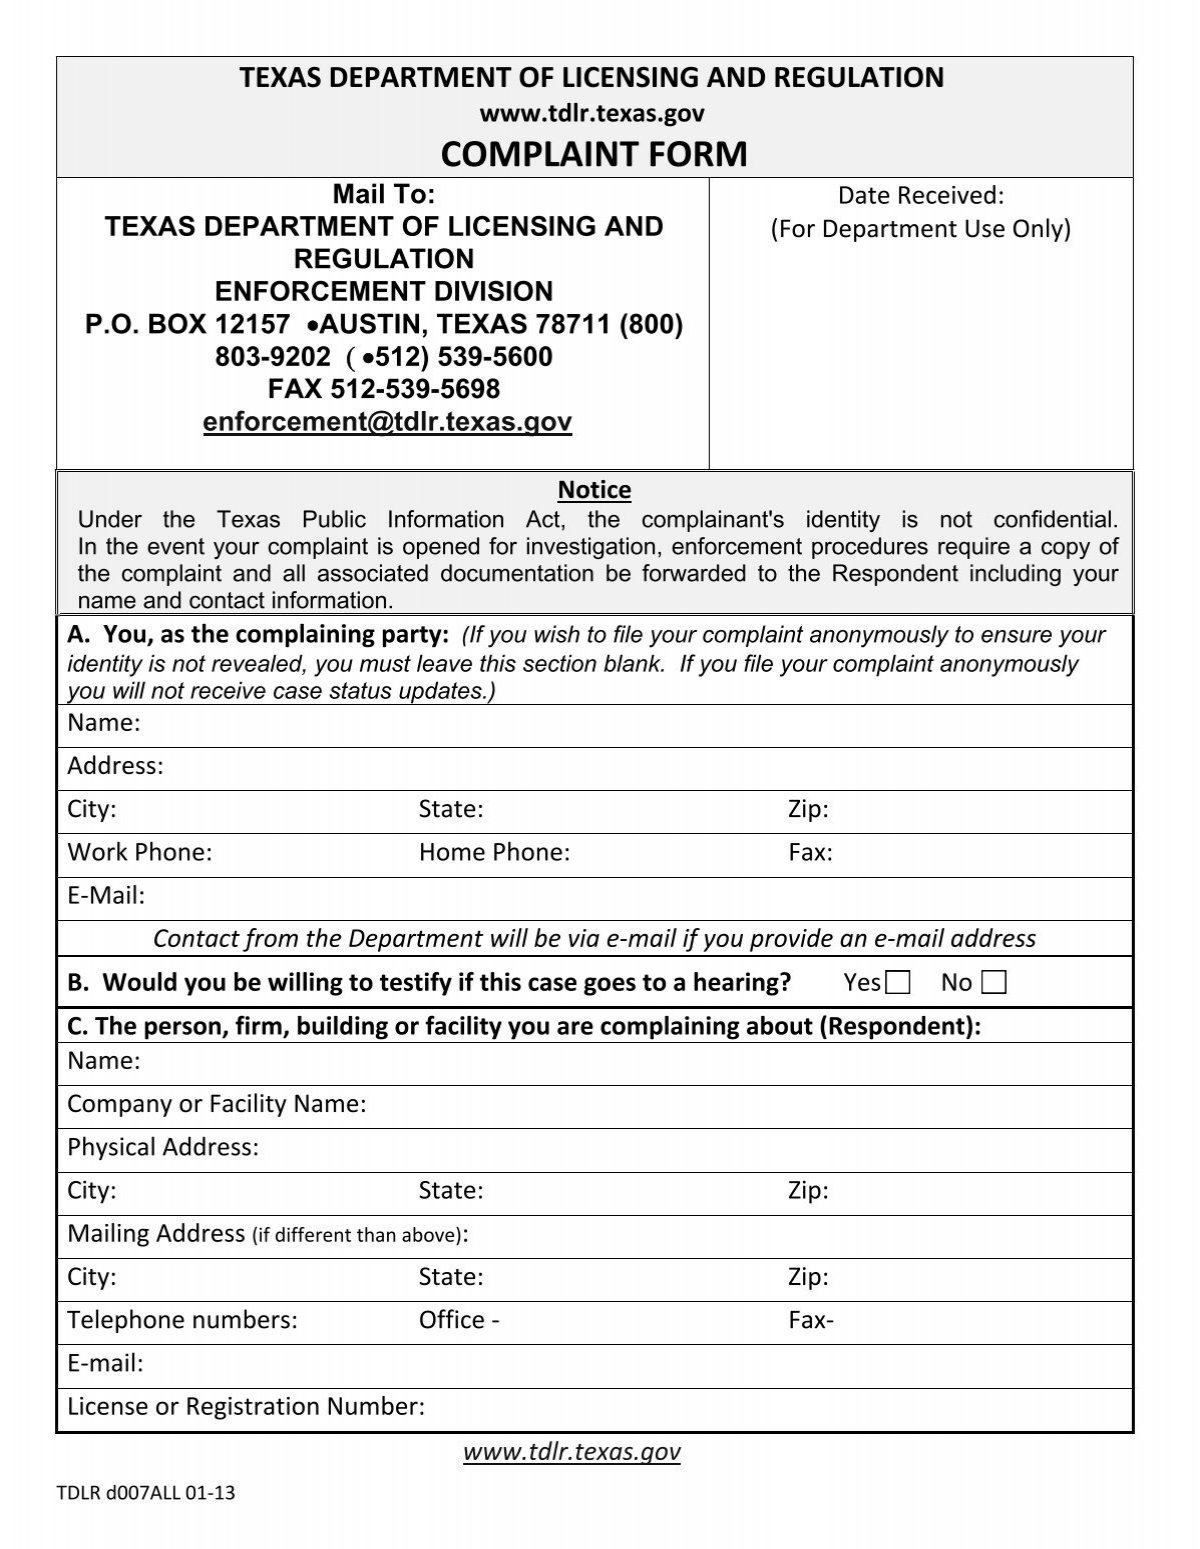 complaint-form-texas-department-of-licensing-and-regulation